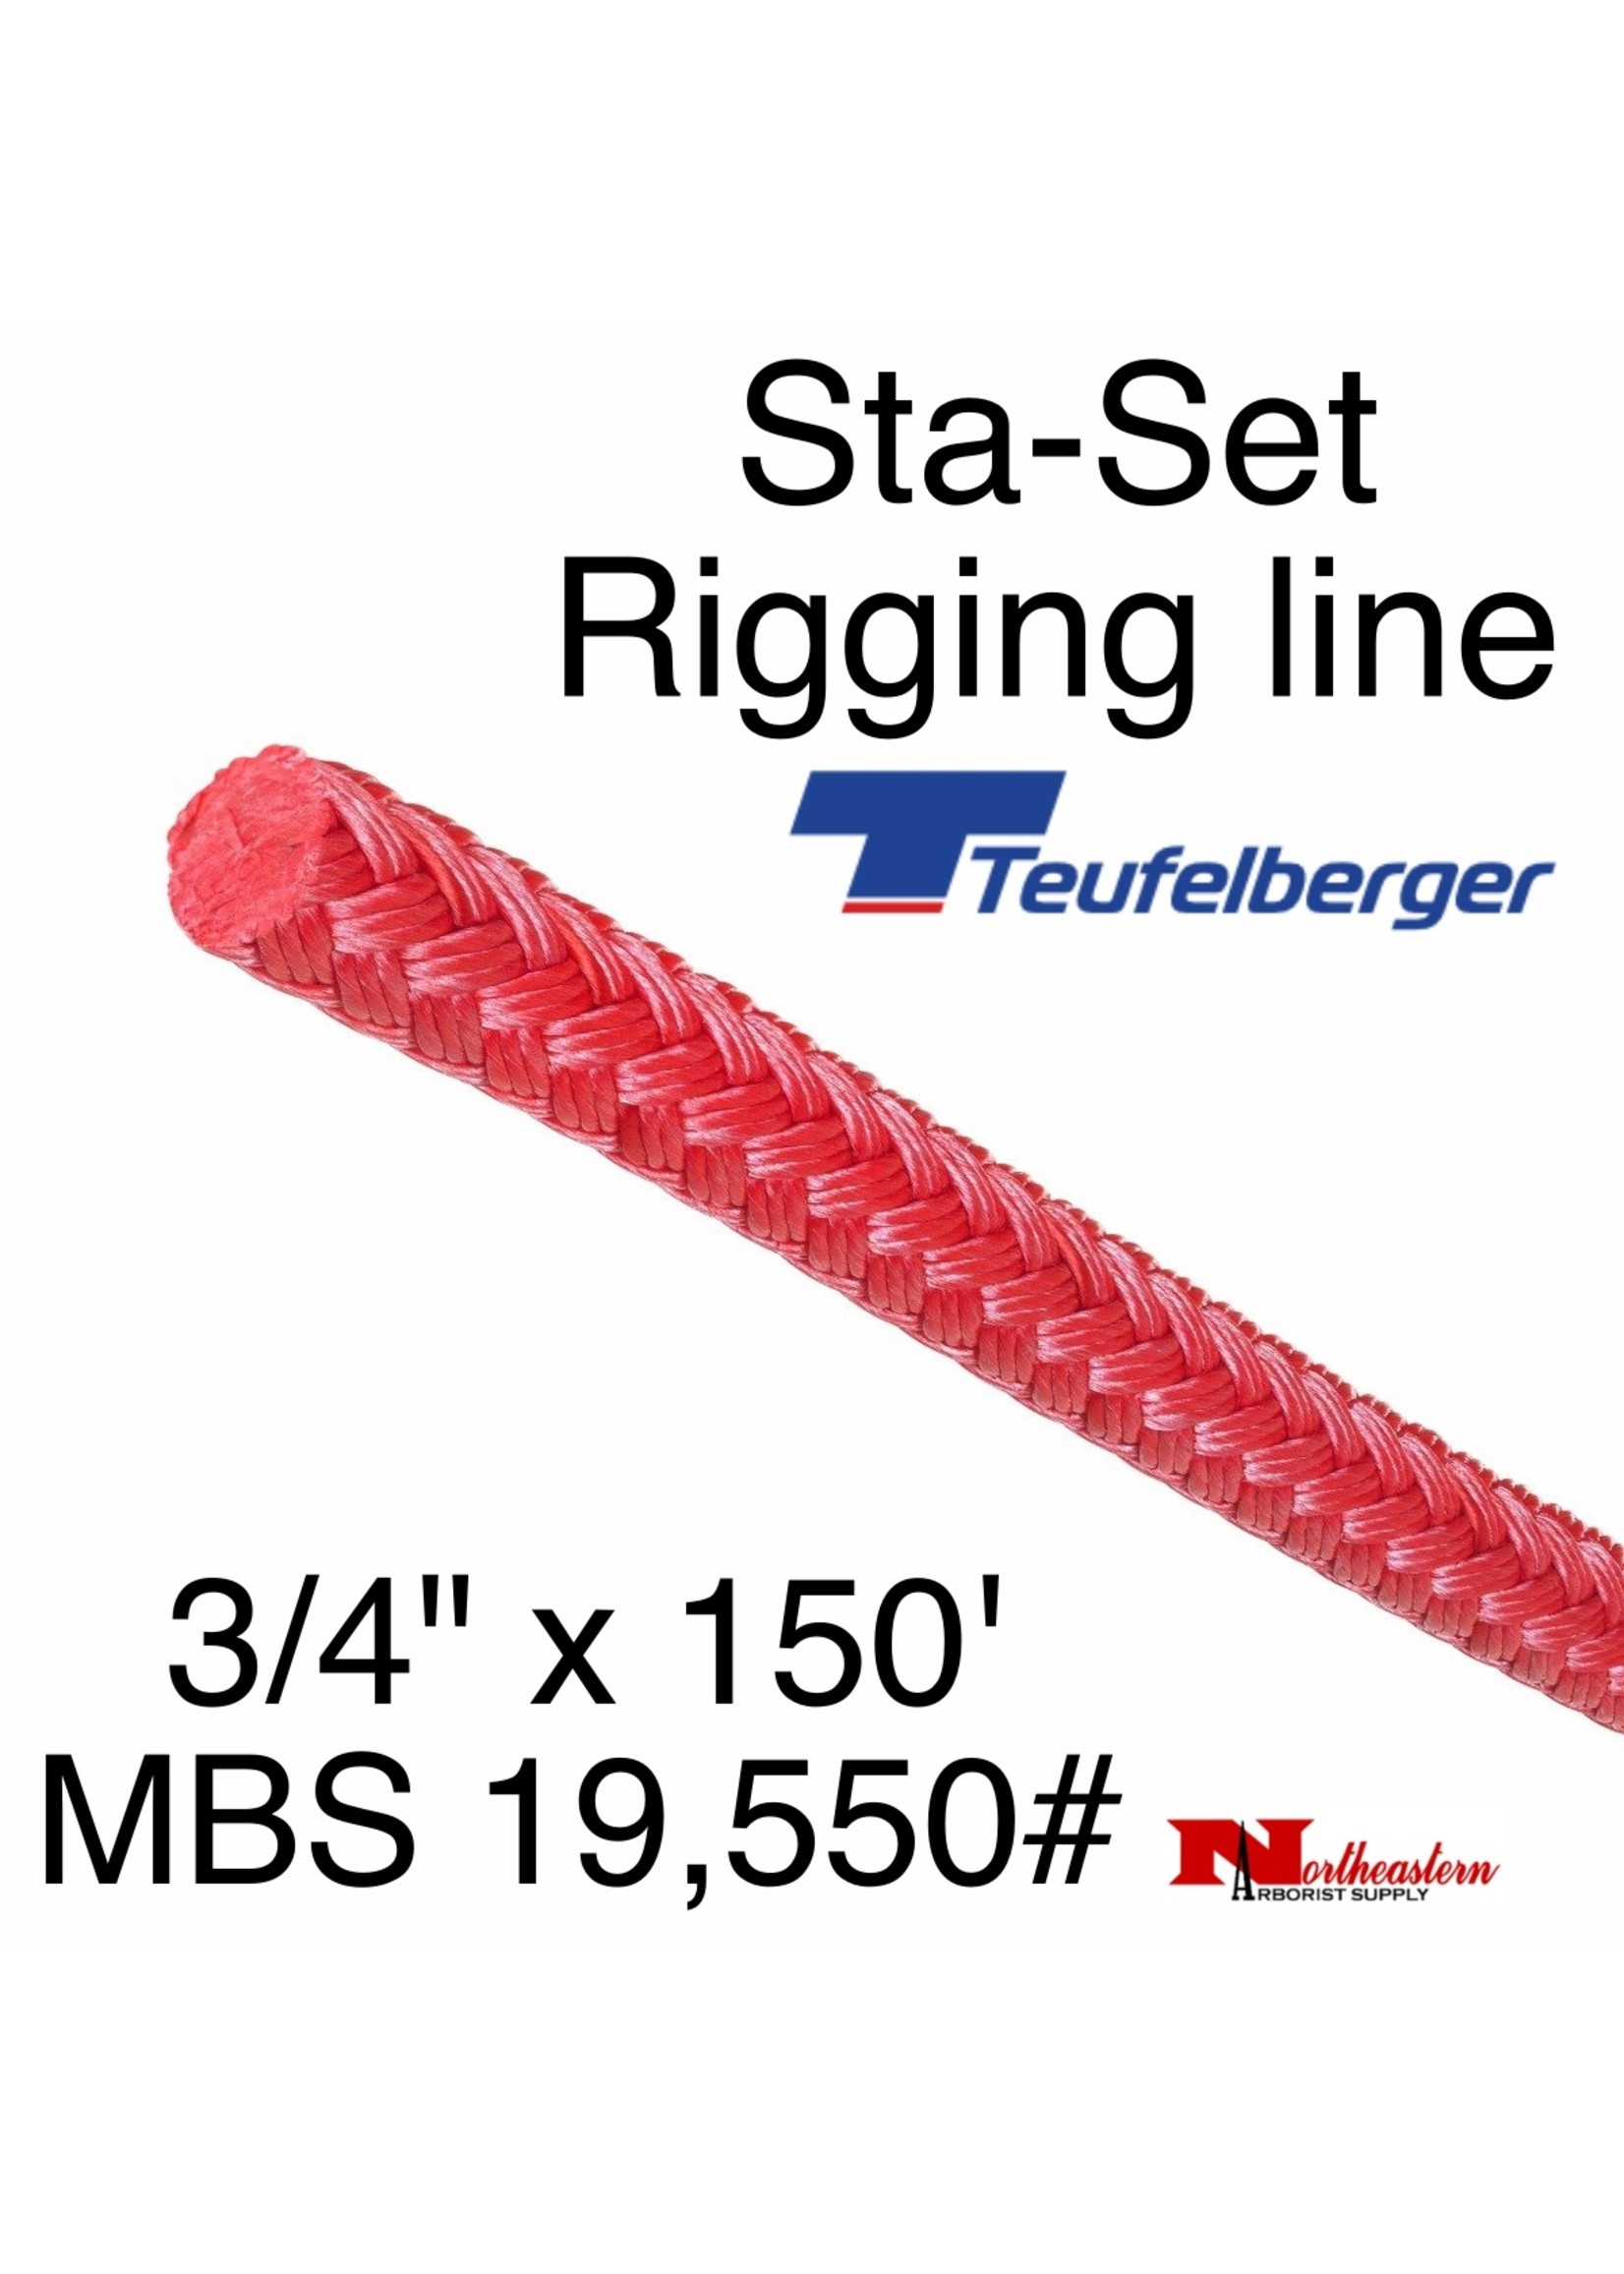 Teufelberger Sta-Set 3/4" x 150' Coated Red 19,550#MBS